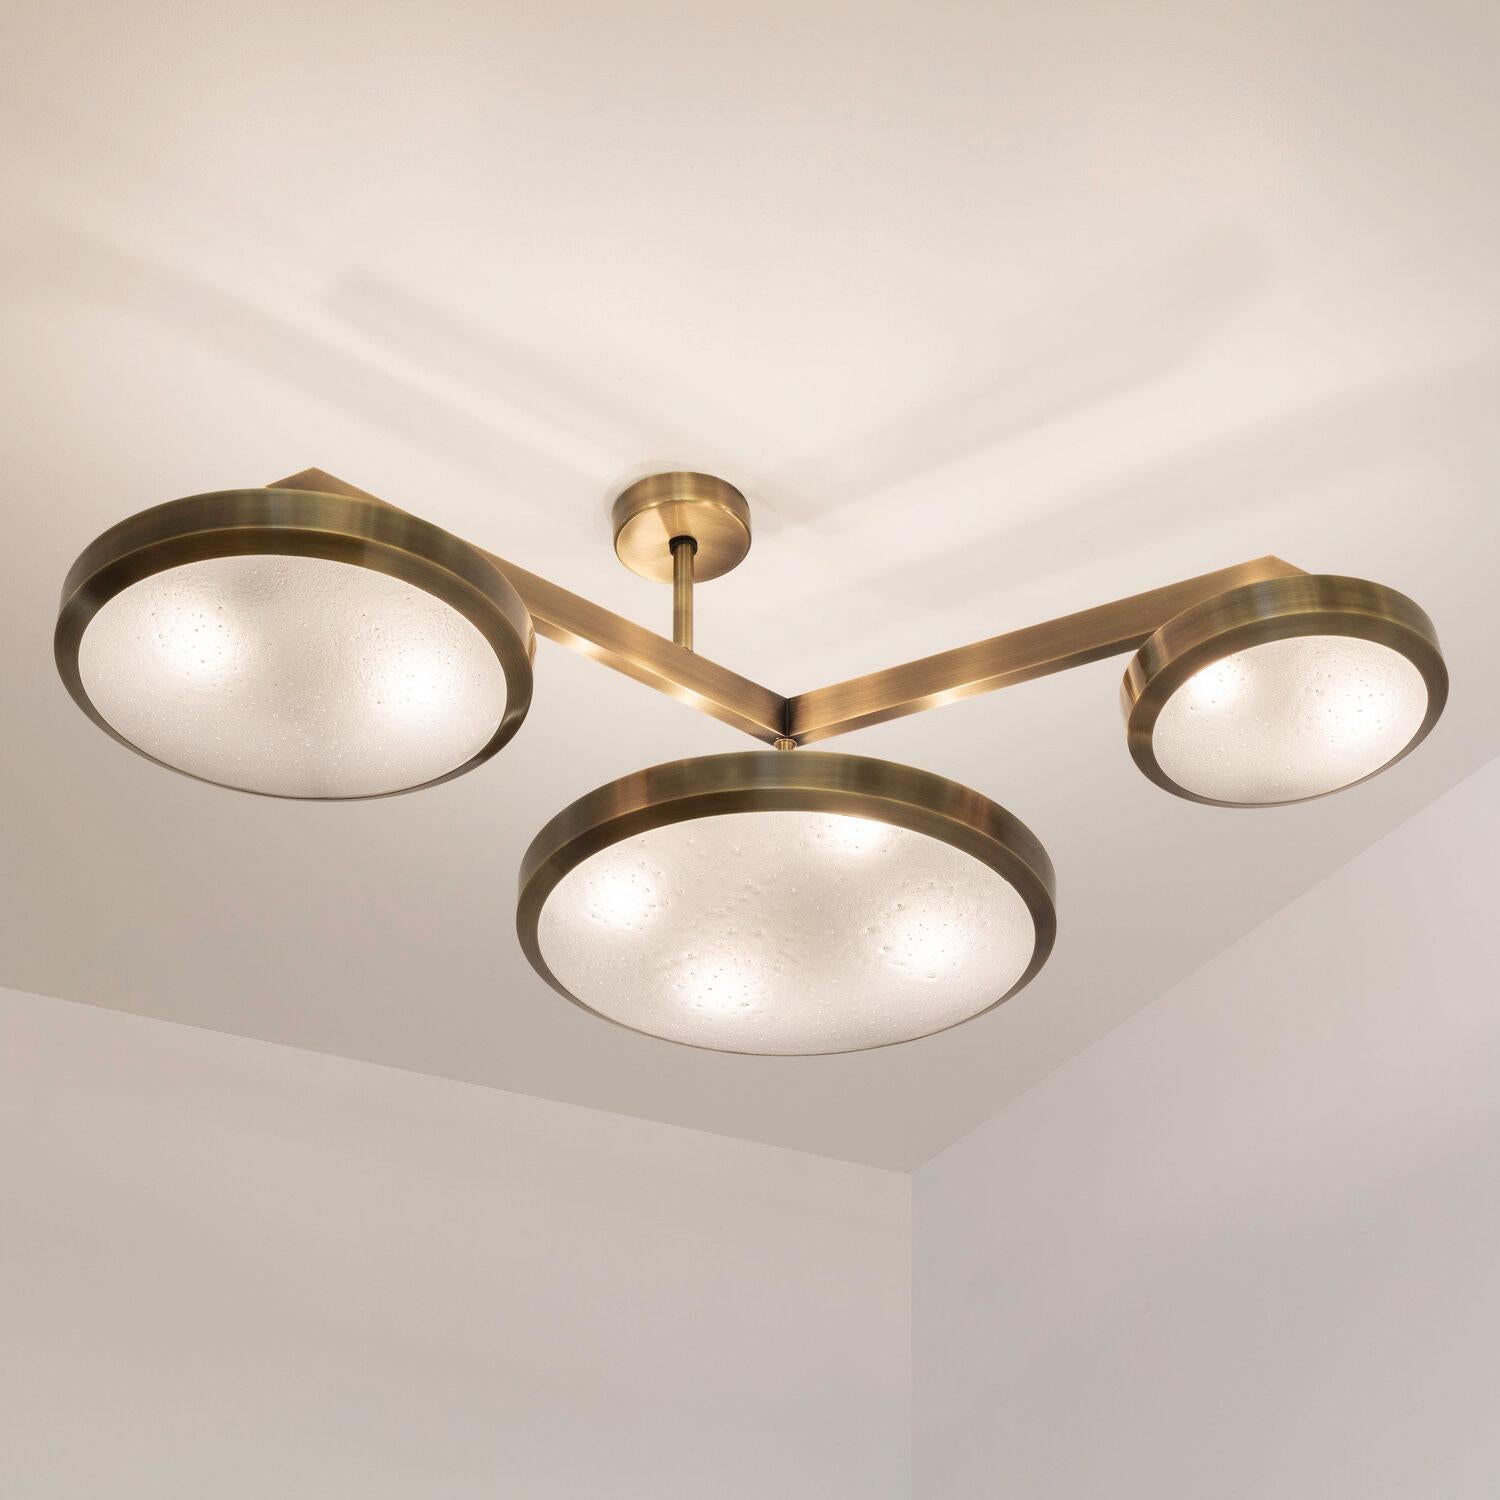 Contemporary Zeta Ceiling Light by Gaspare Asaro-Satin Brass Finish For Sale